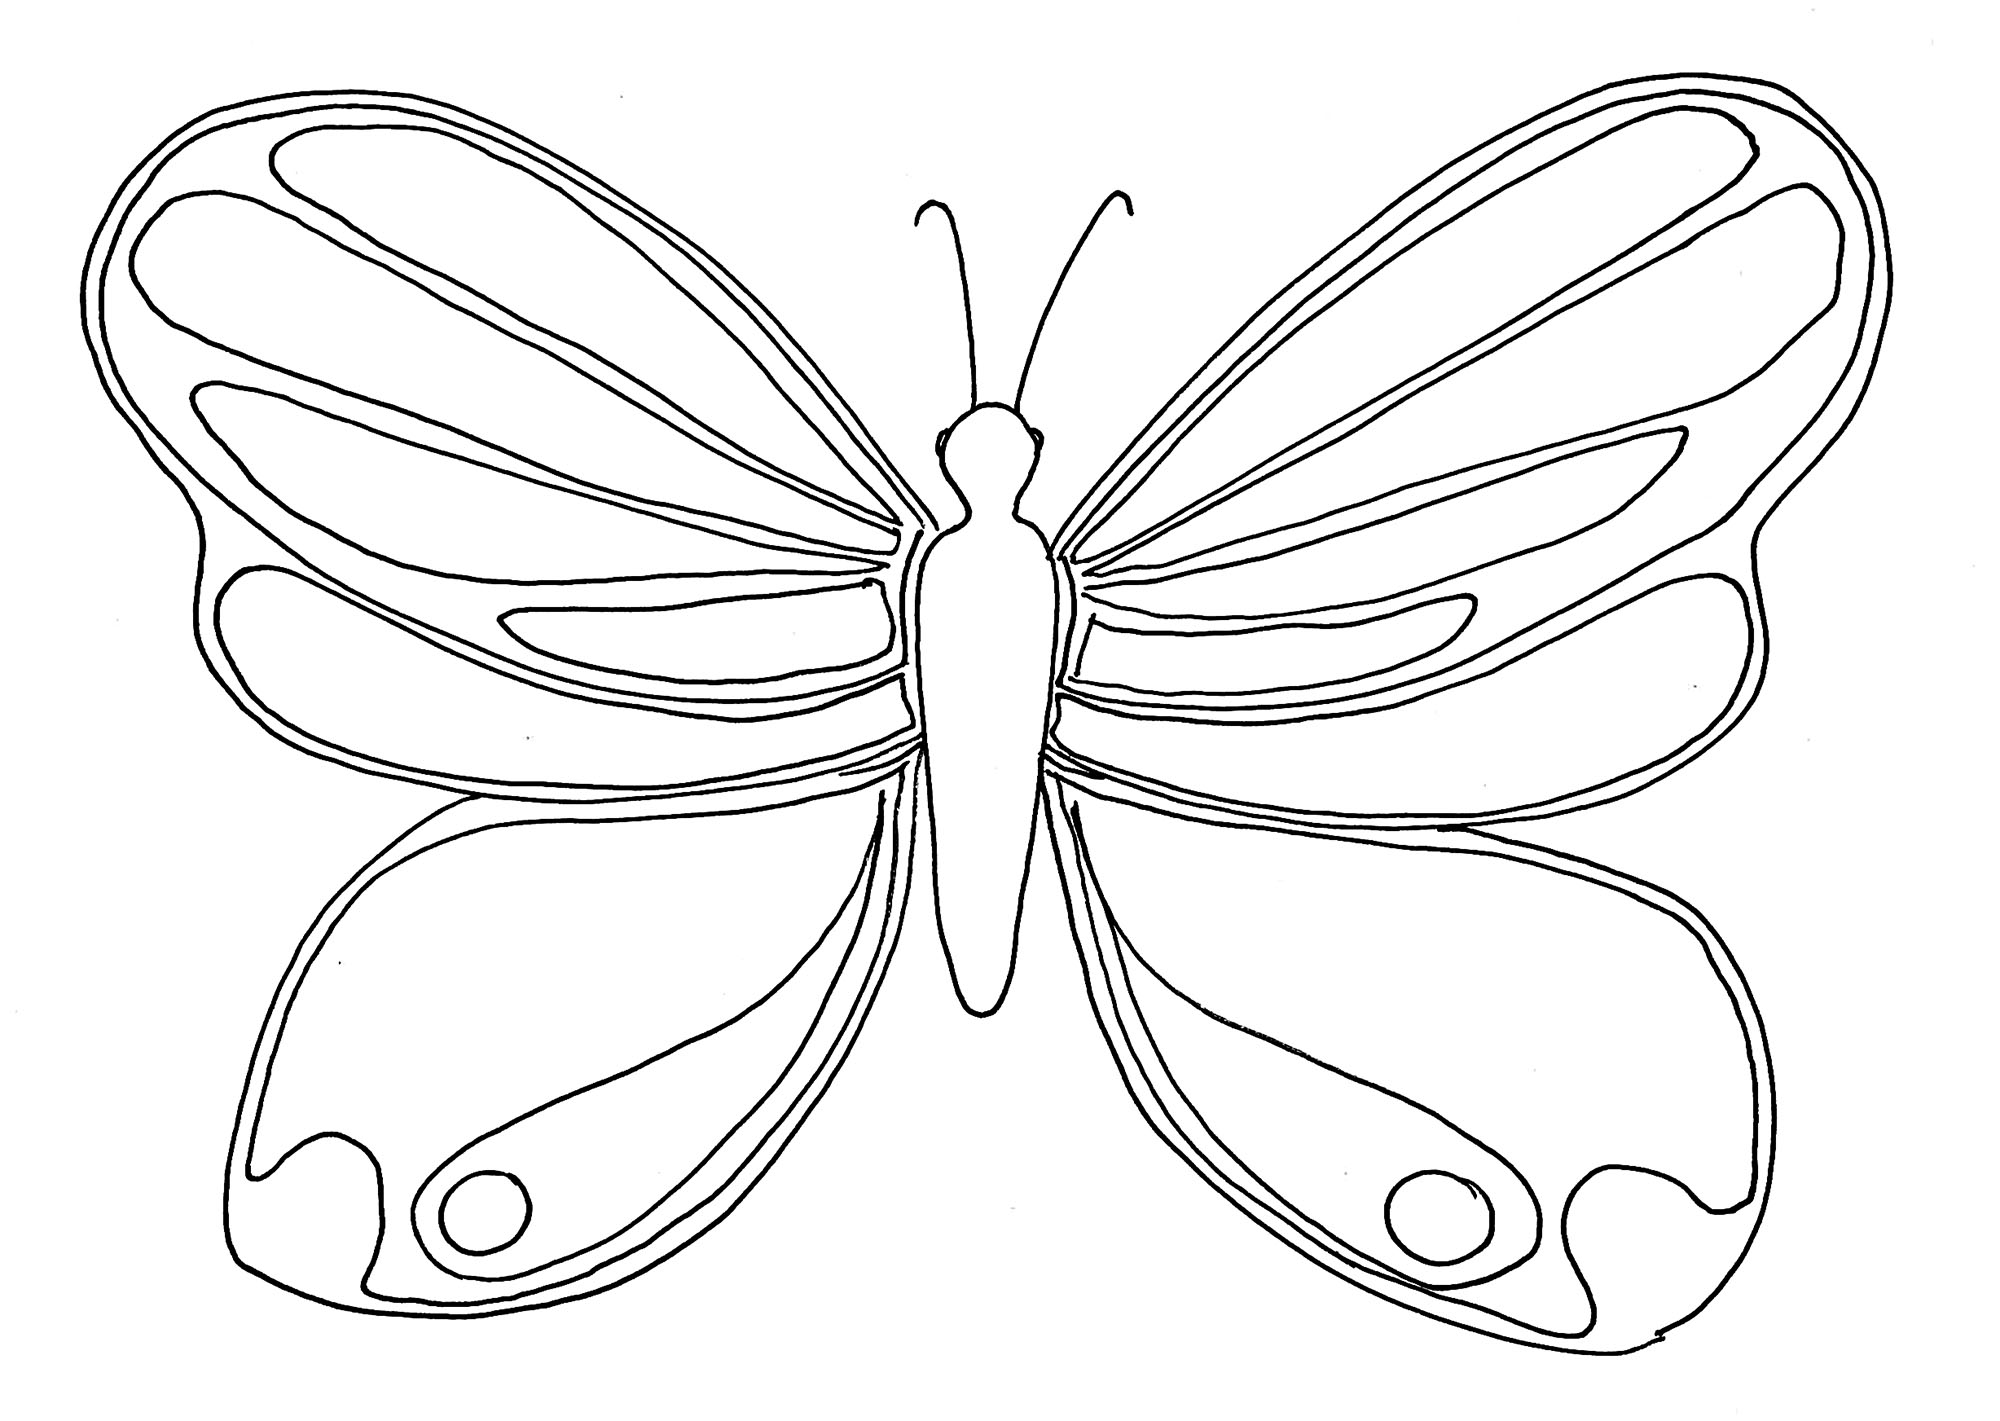 Butterfly image to download and print for children